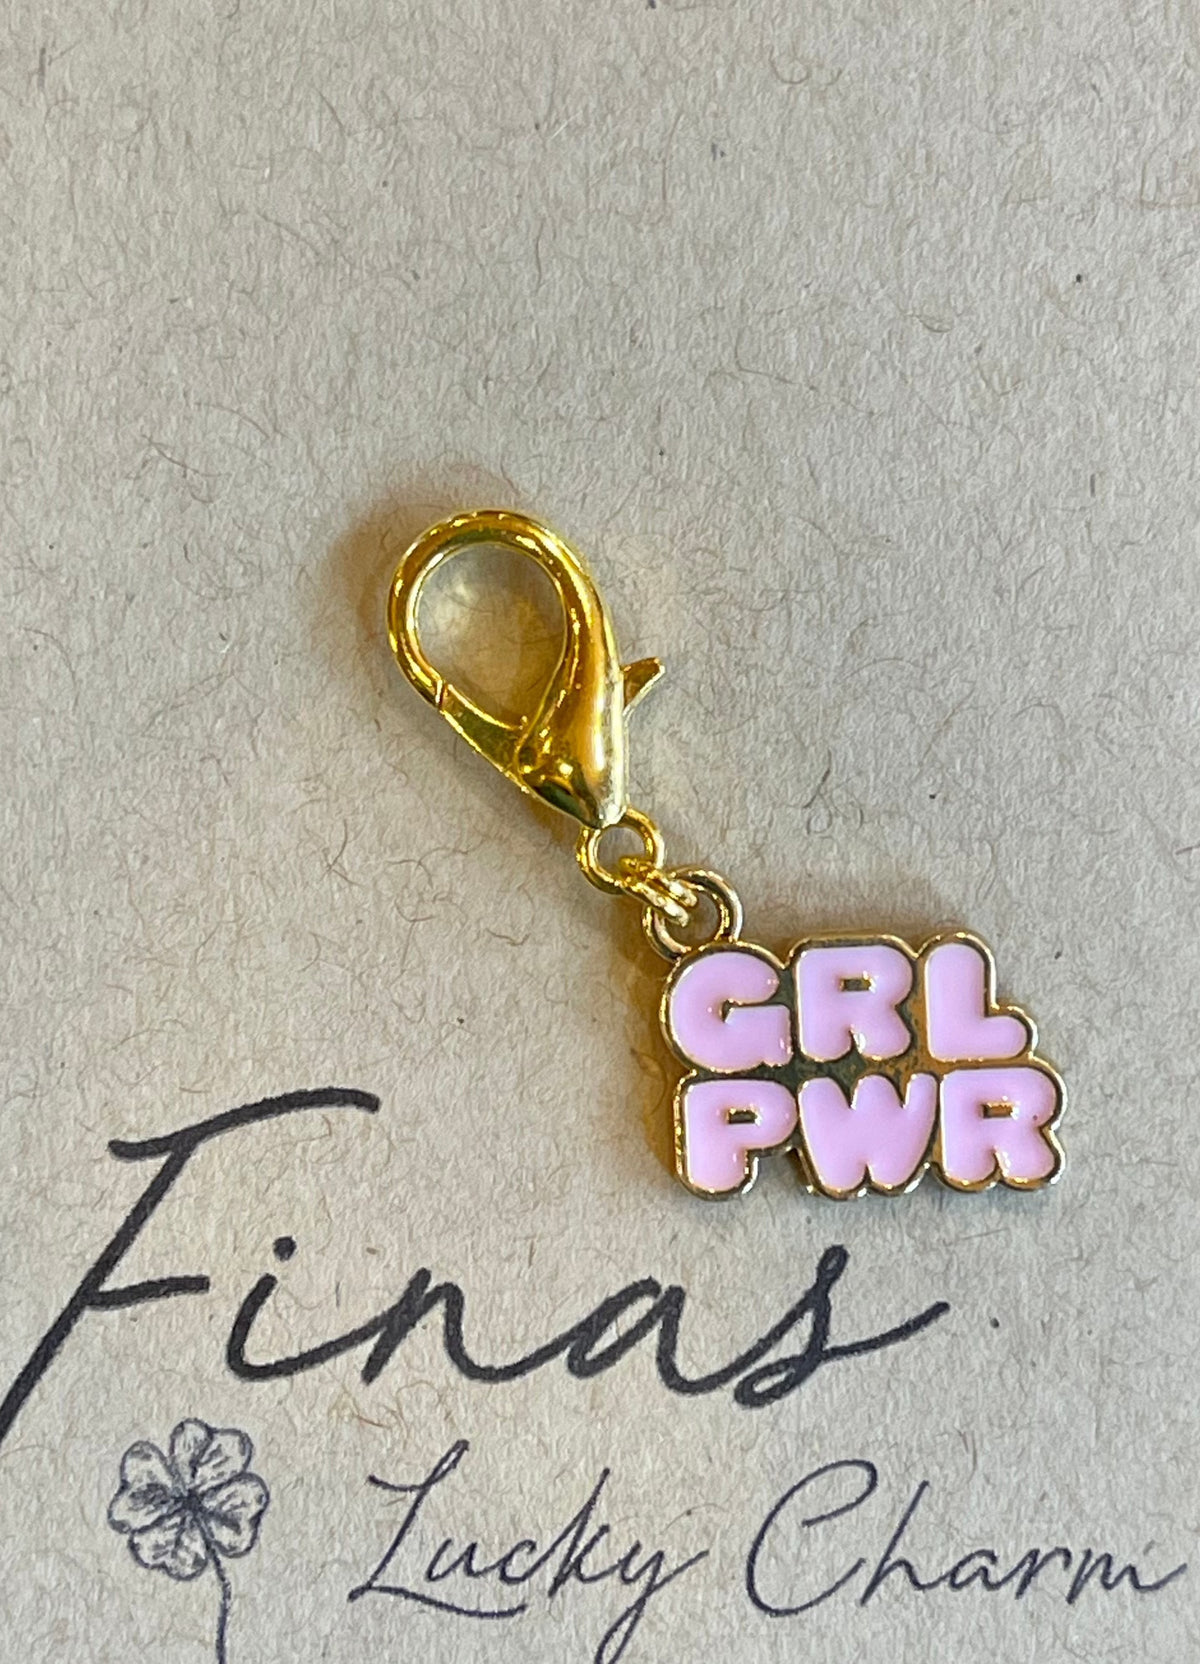 Fina's Lucky Charm charm Girl Power Fina's Lucky Charm equestrian team apparel online tack store mobile tack store custom farm apparel custom show stable clothing equestrian lifestyle horse show clothing riding clothes horses equestrian tack store